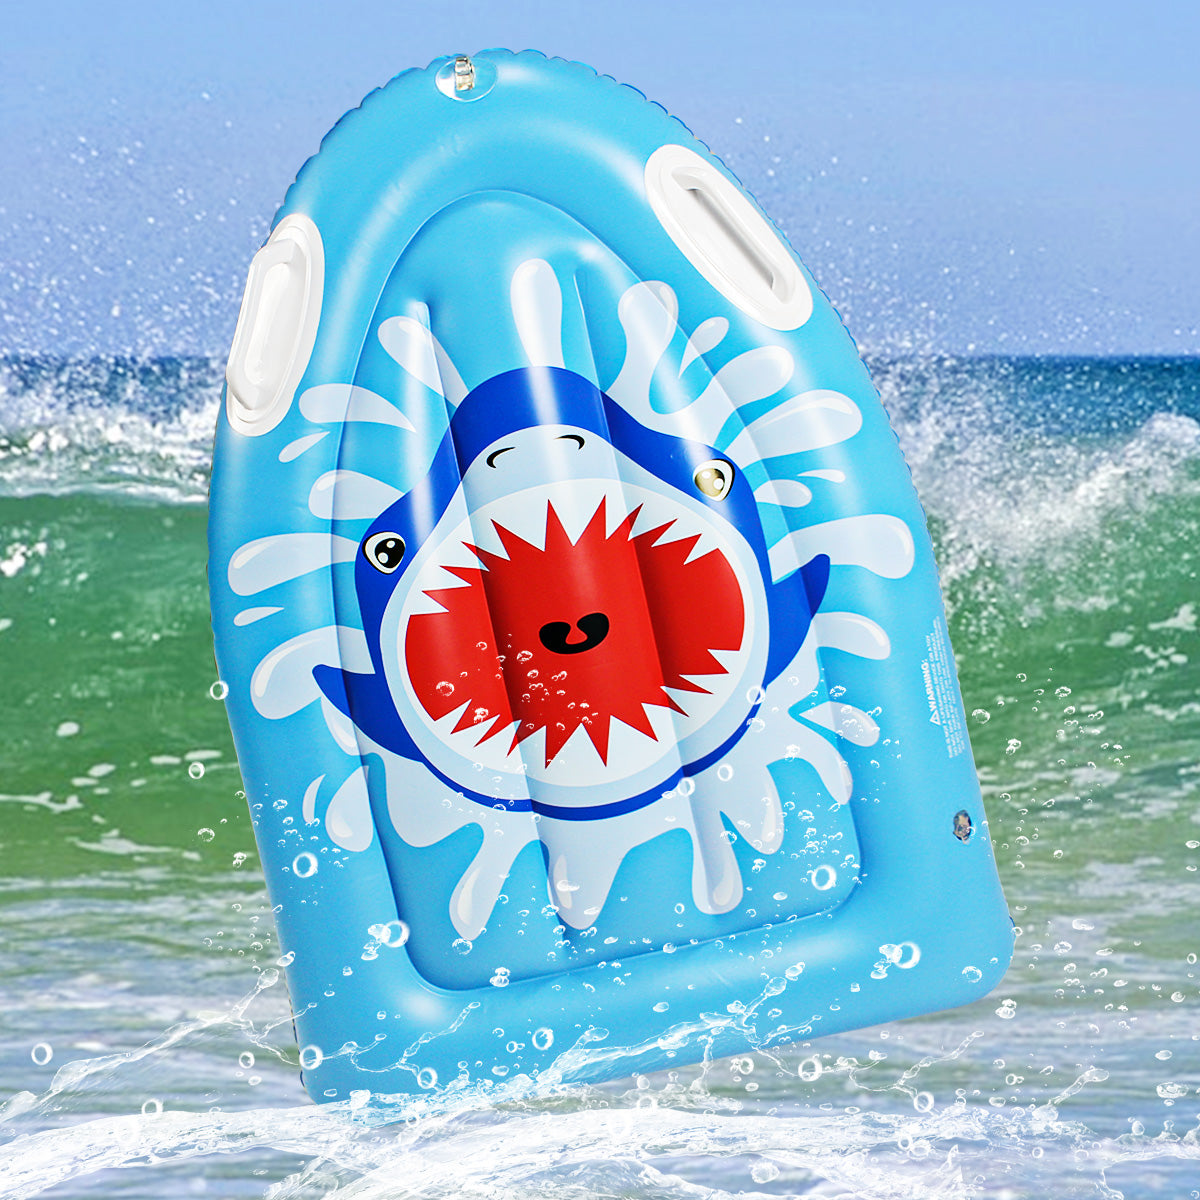 SUGIFT Inflatable Pool Floats Inflatable Surfboard Inflatable Tubes Fun Water Toys for Kids Beach Outdoor Party Supplies